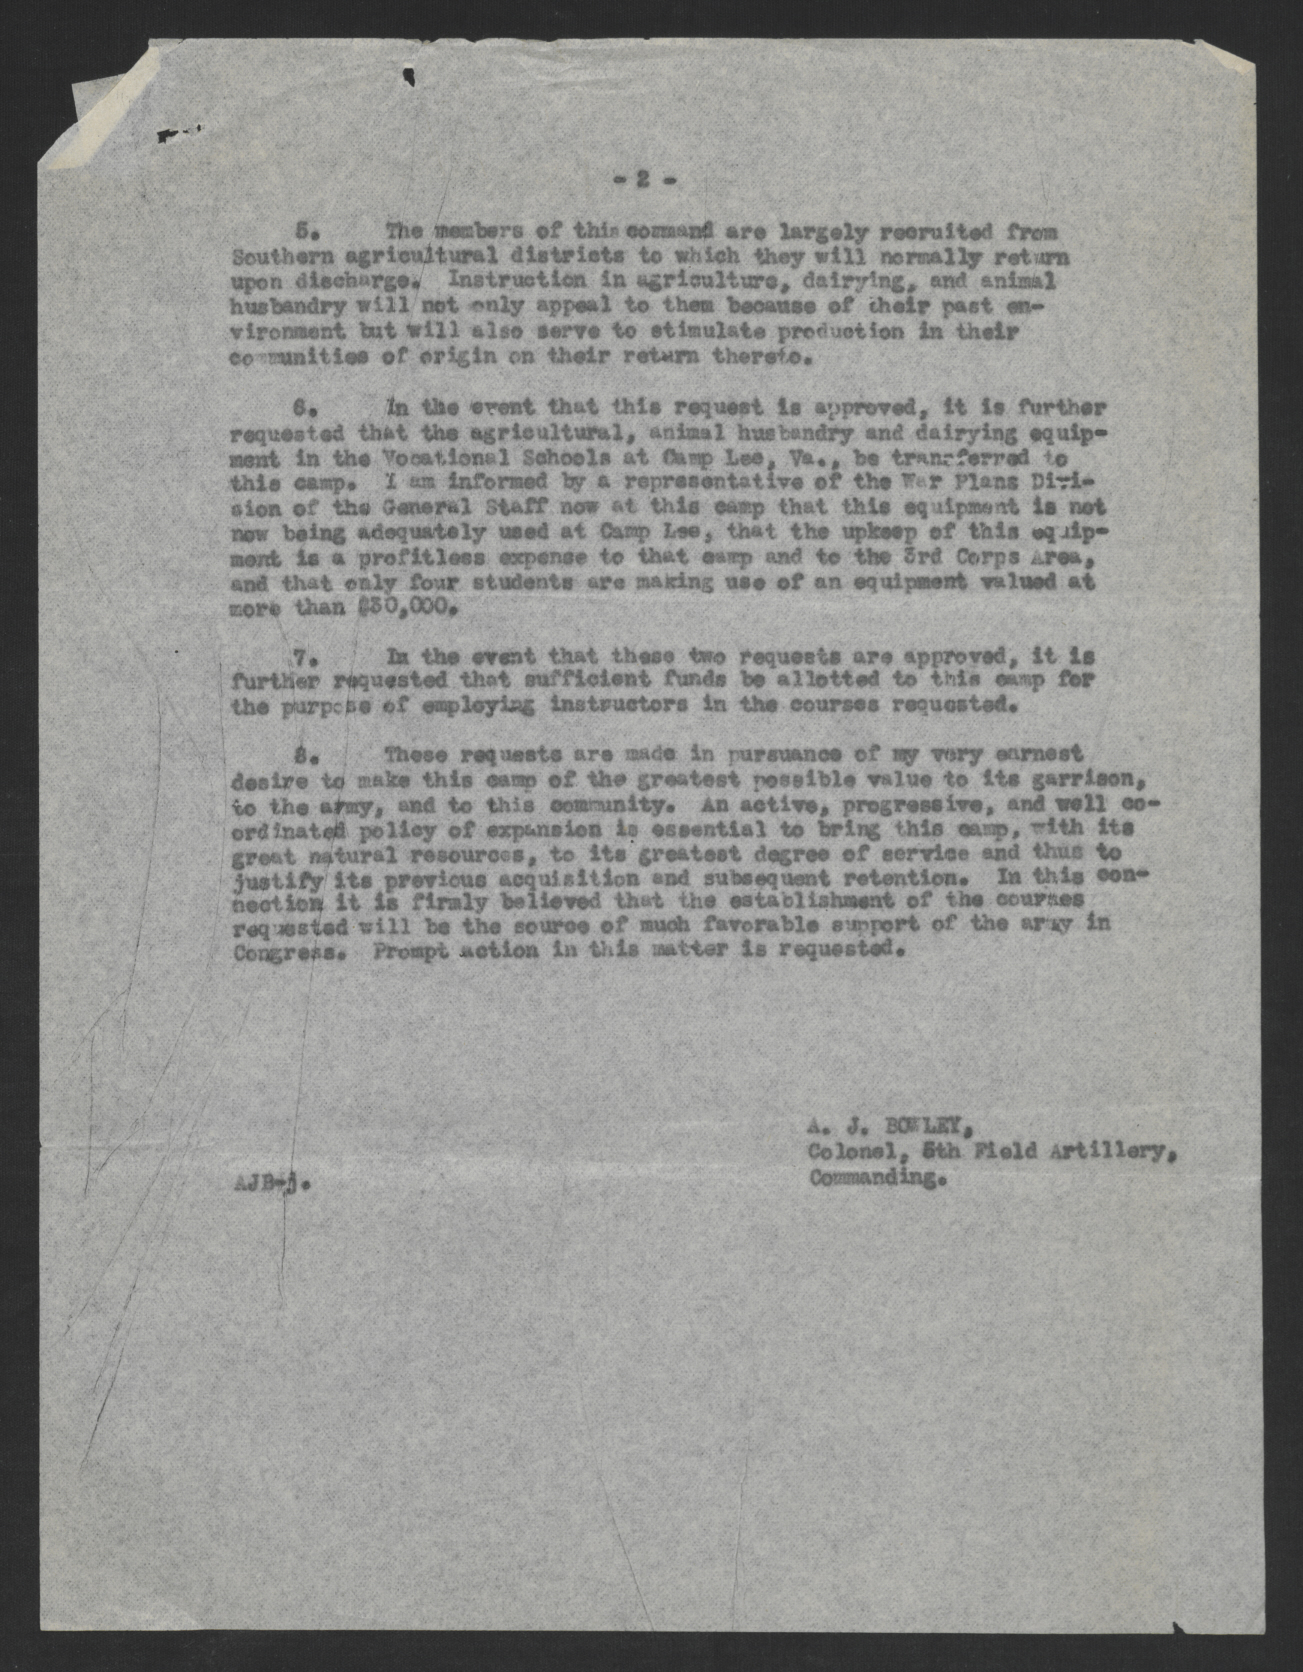 Letter from Albert J. Bowley to the Commanding General of the 4th Corps, November 27, 1920, page 2